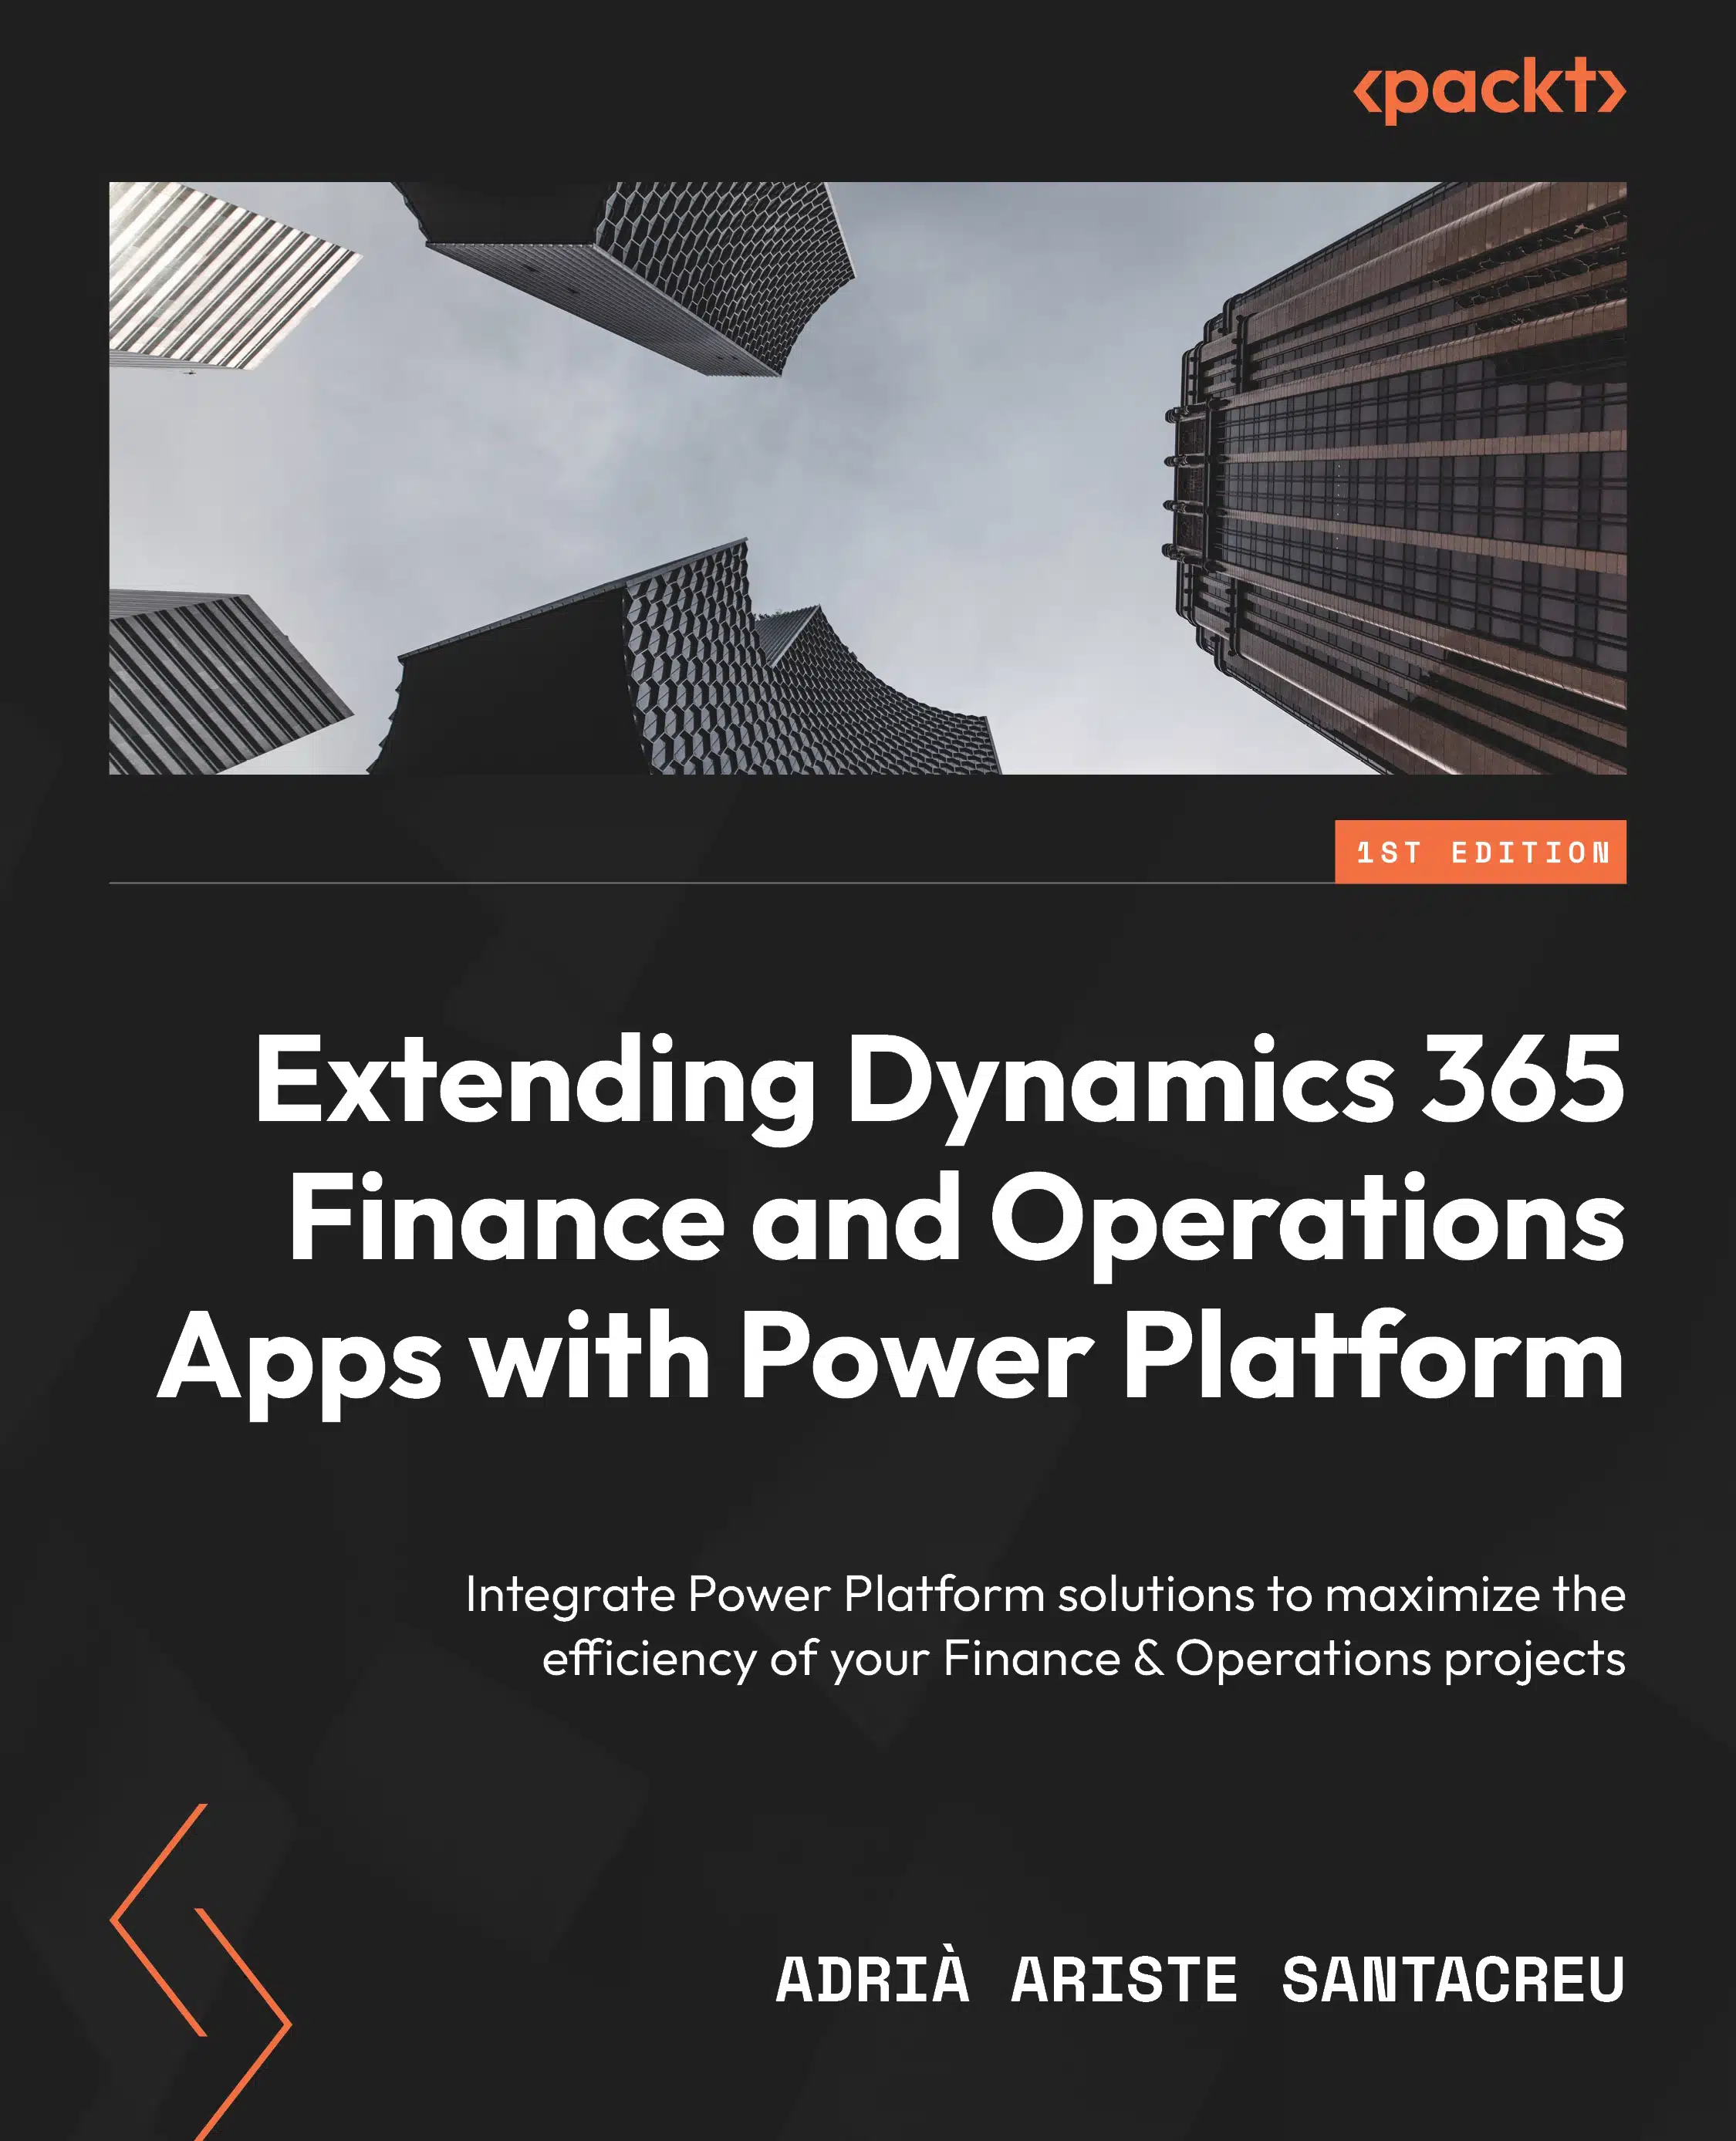 Cover of the "Extending Dynamics 365 Finance and Operations Apps with Power Platform" book by Adrià Ariste Santacreu